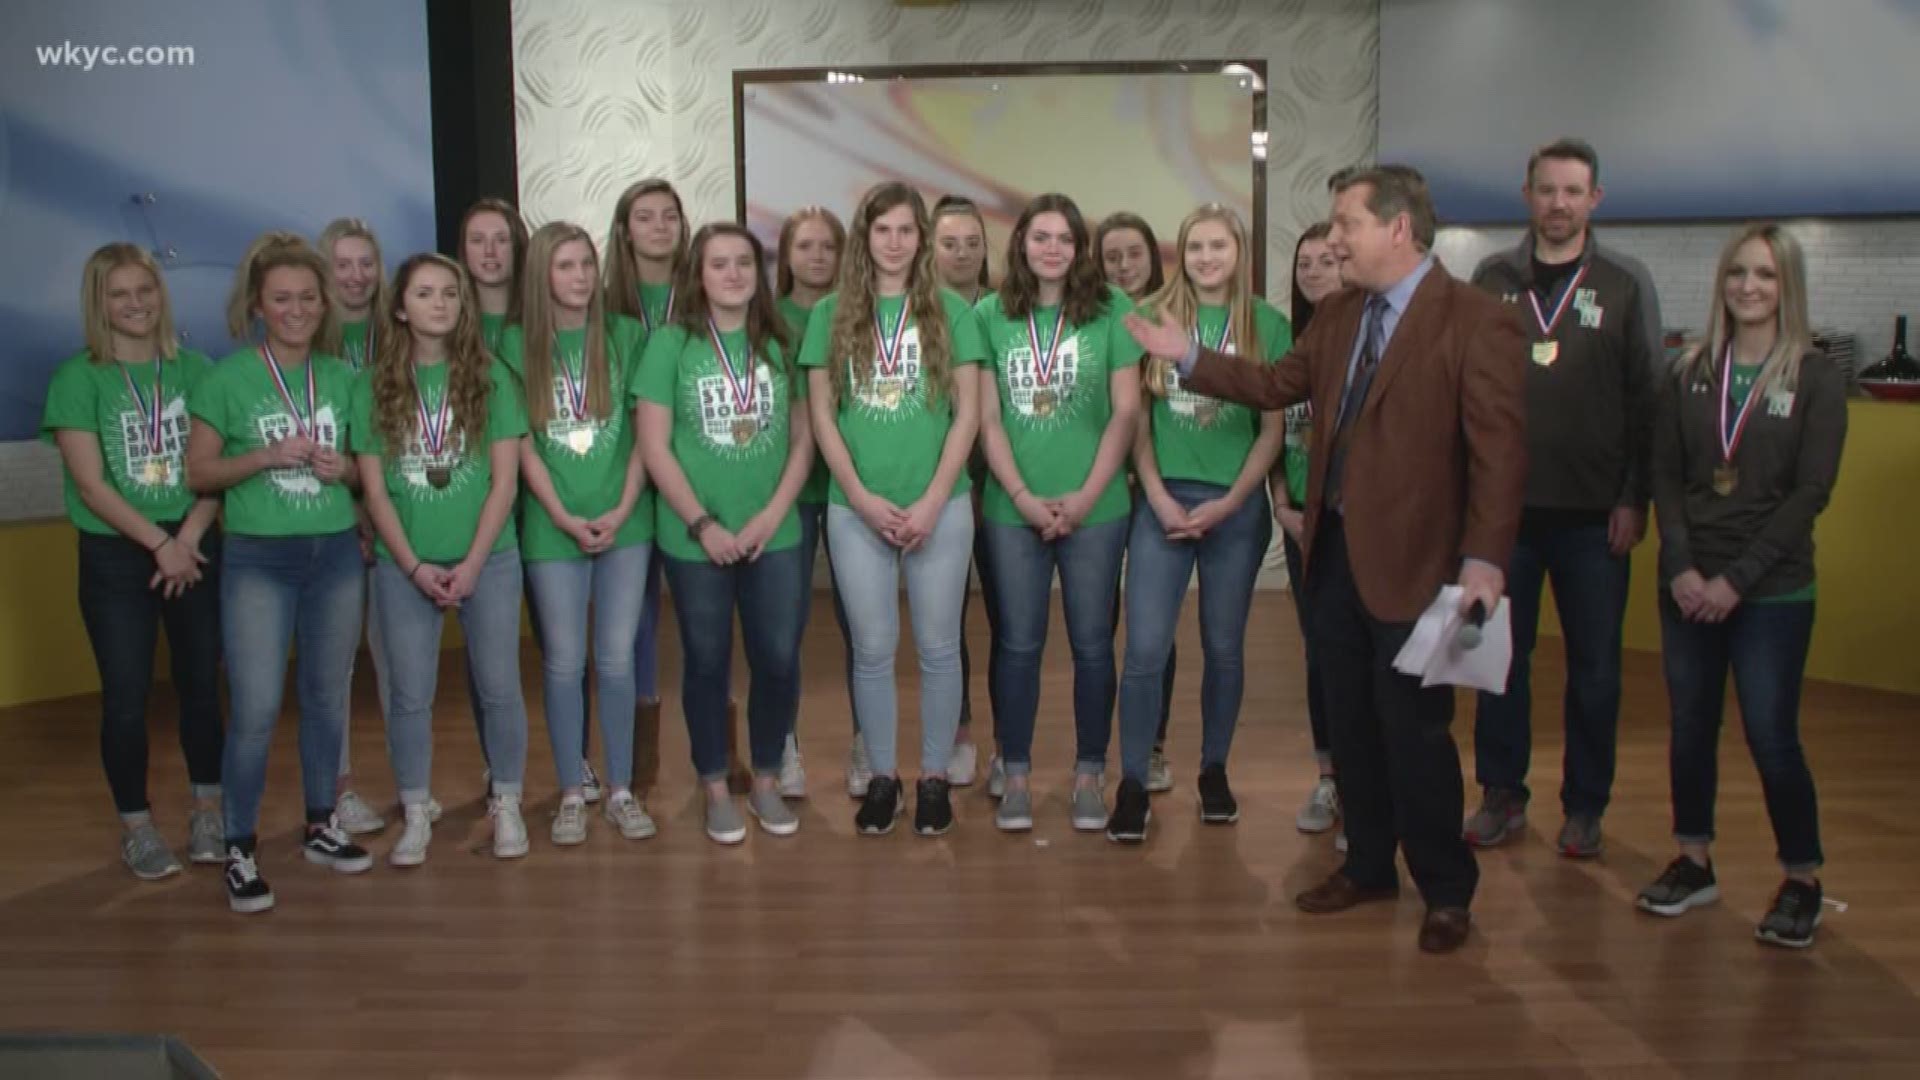 Holy Name state volleyball championship team visits Donovan Live wkyc